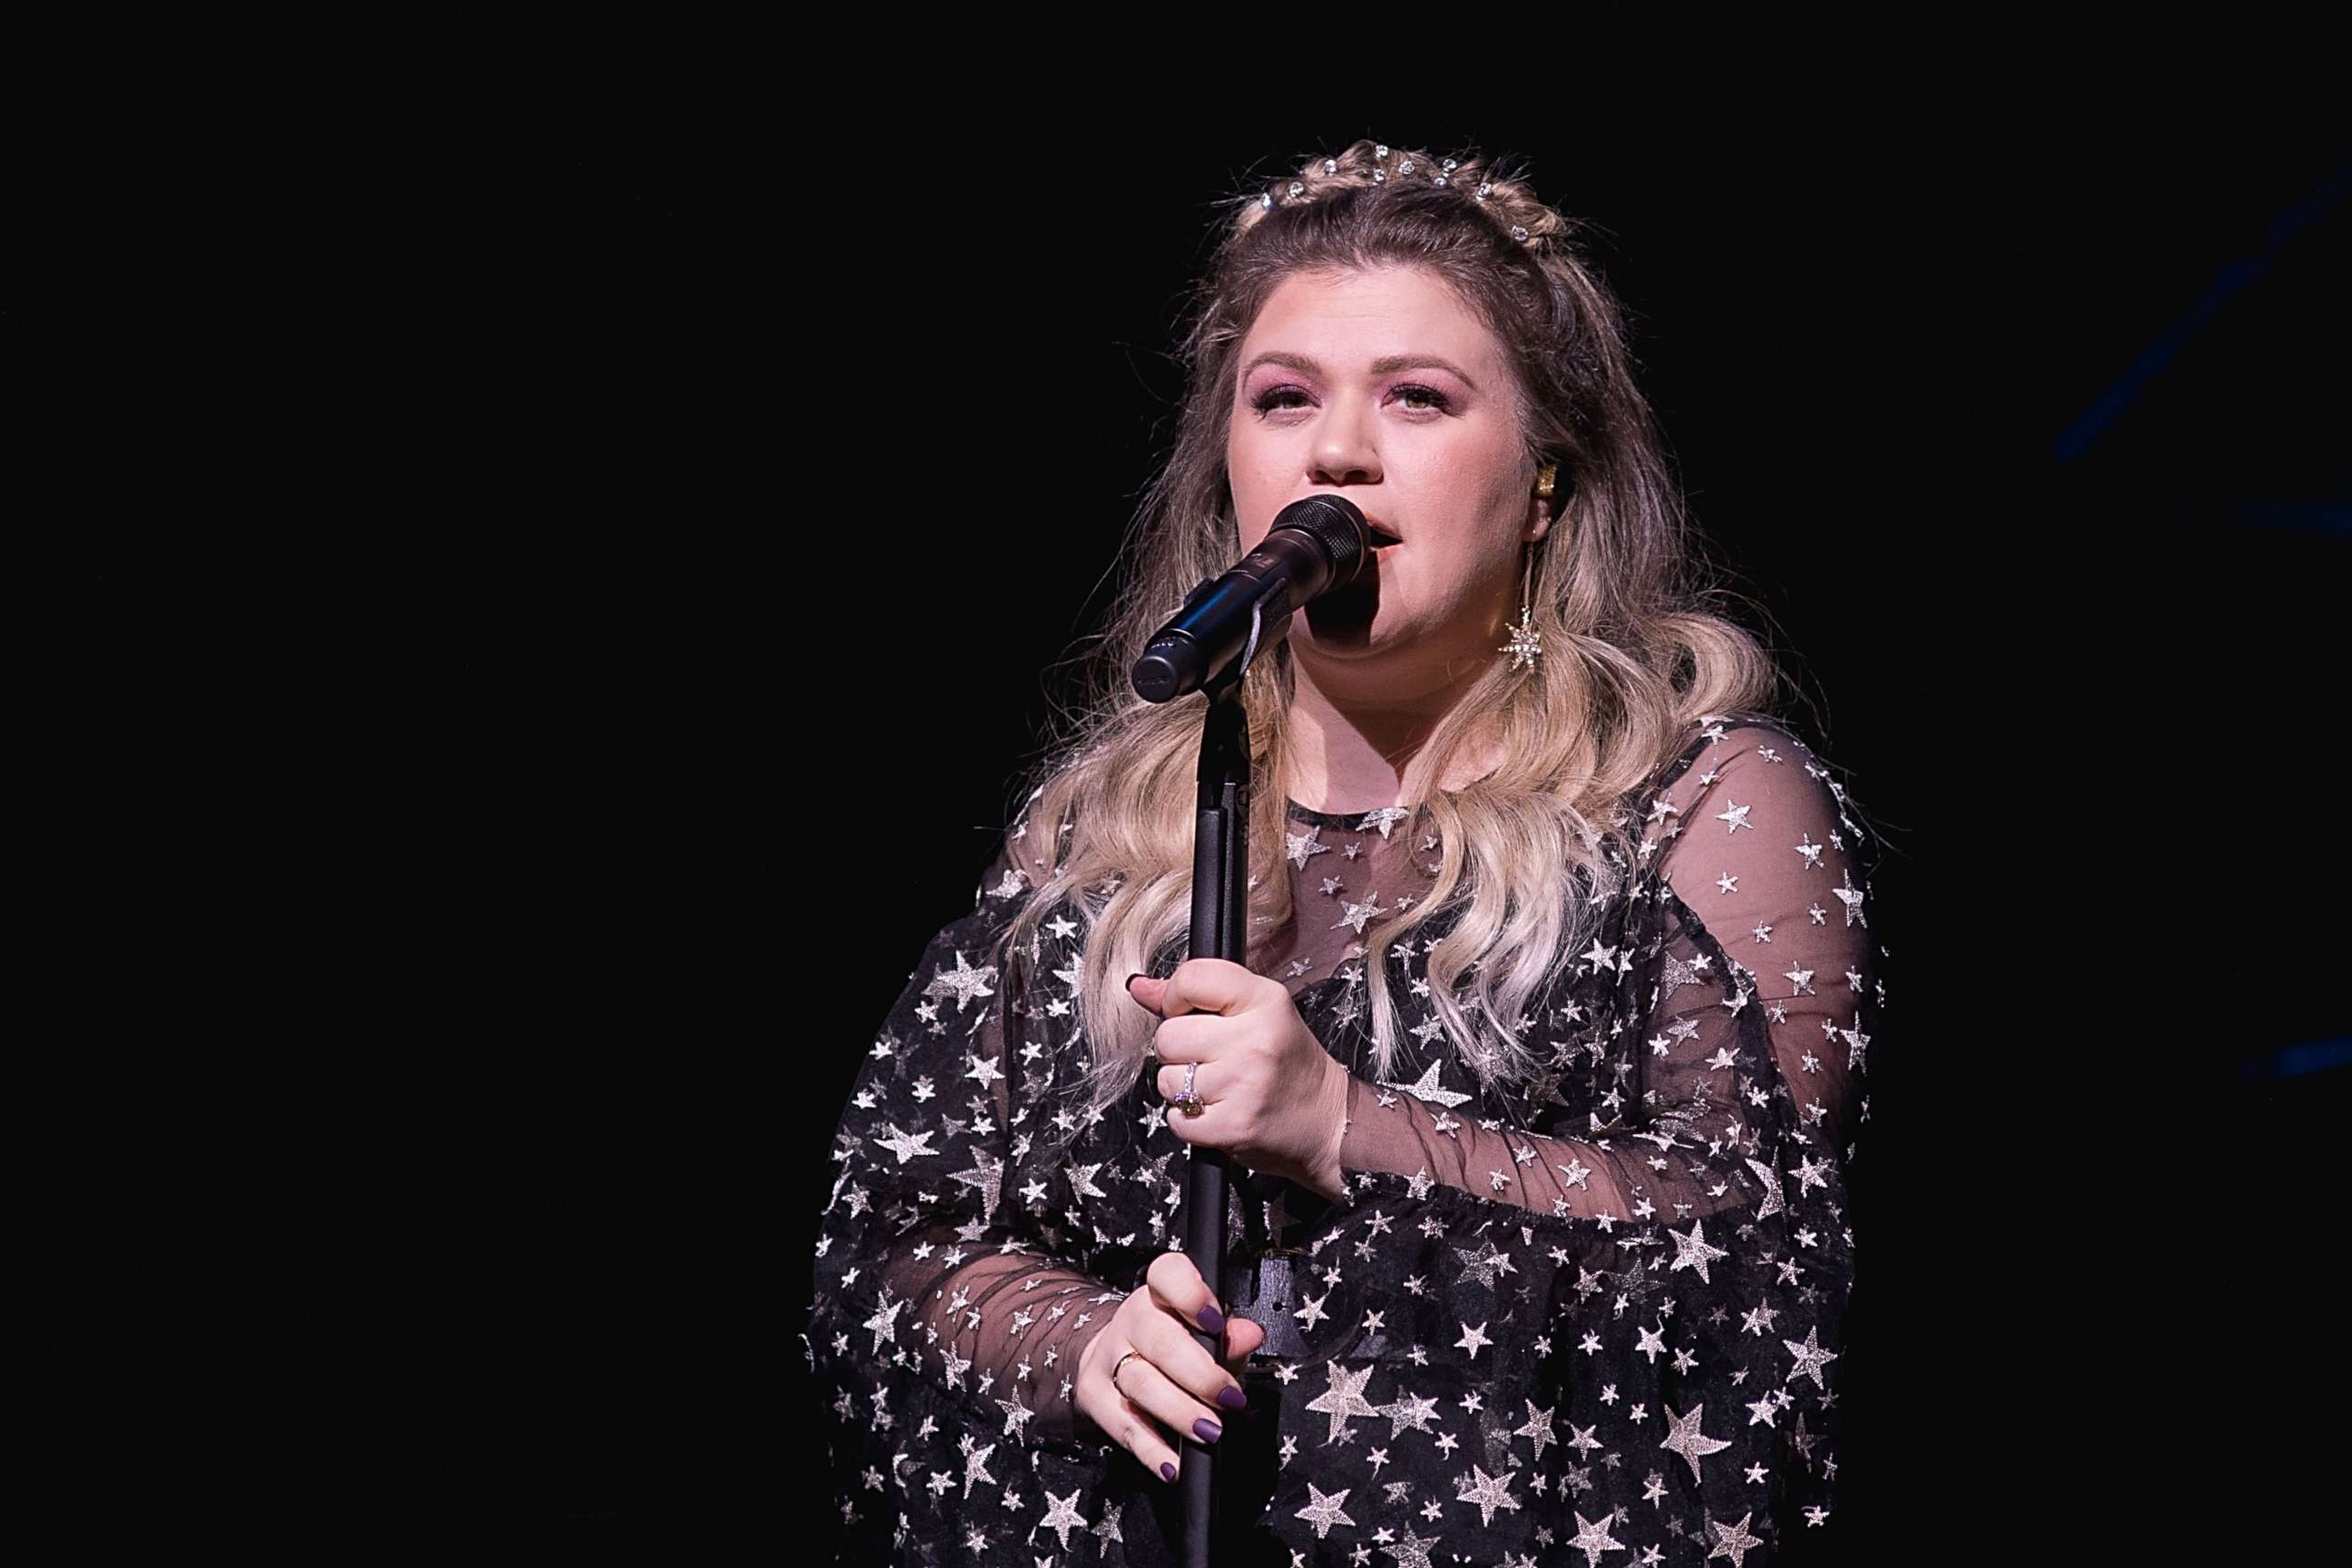 PHOTO: Singer-songwriter Kelly Clarkson performs onstage during the Merry Mix Show 2017 at ACL Live on Dec. 13, 2017 in Austin, Texas.